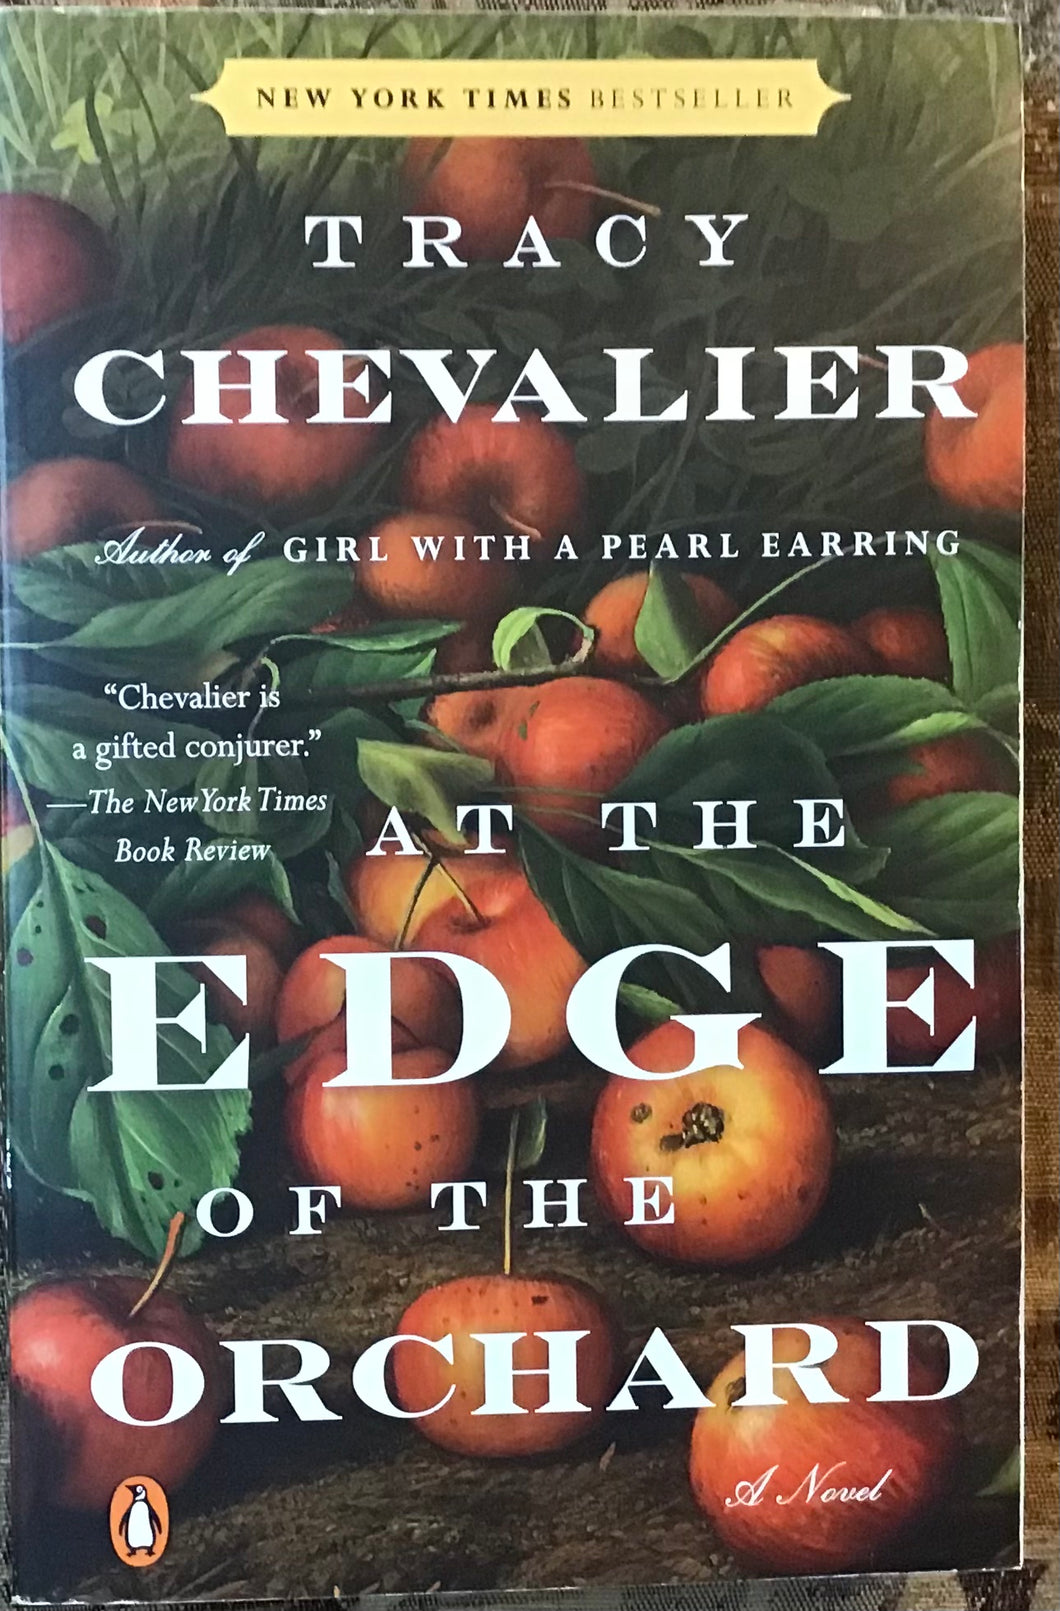 At The Edge of the Orchard, Tracy Chevalier